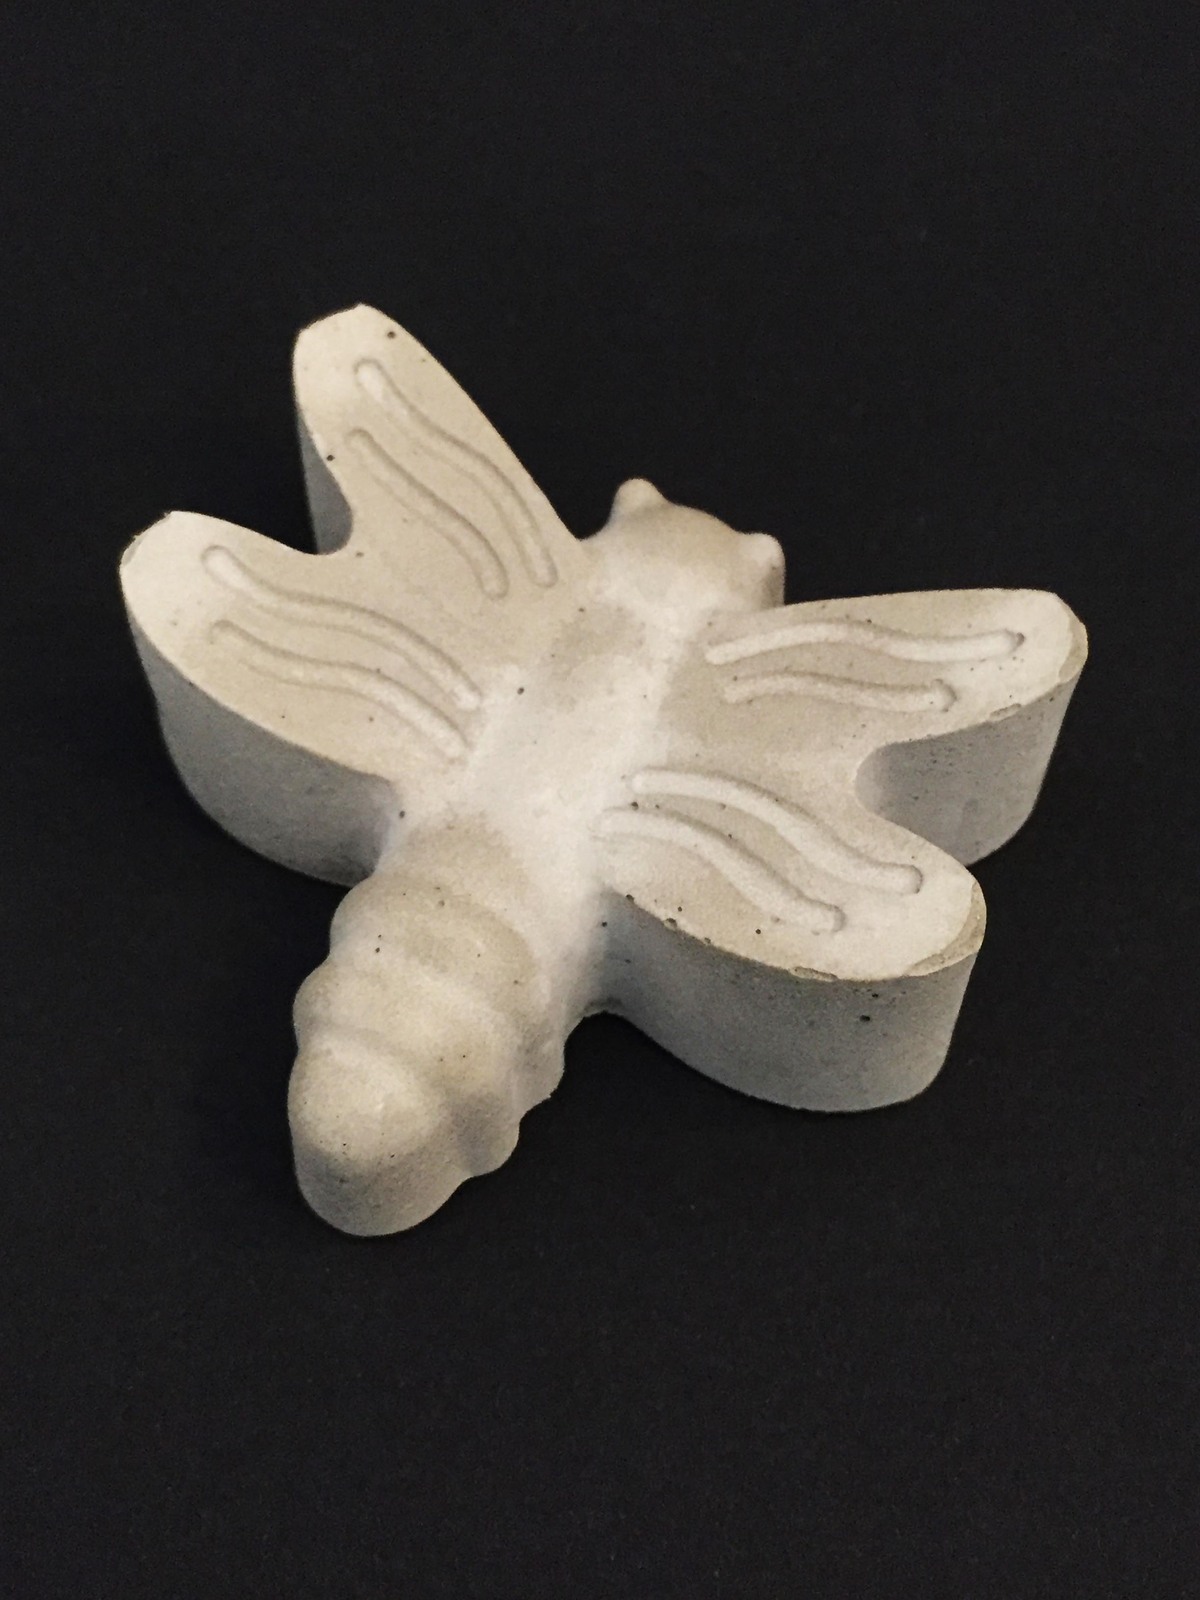 Primary image for Concrete Paperweight - Dragonfly - Plain